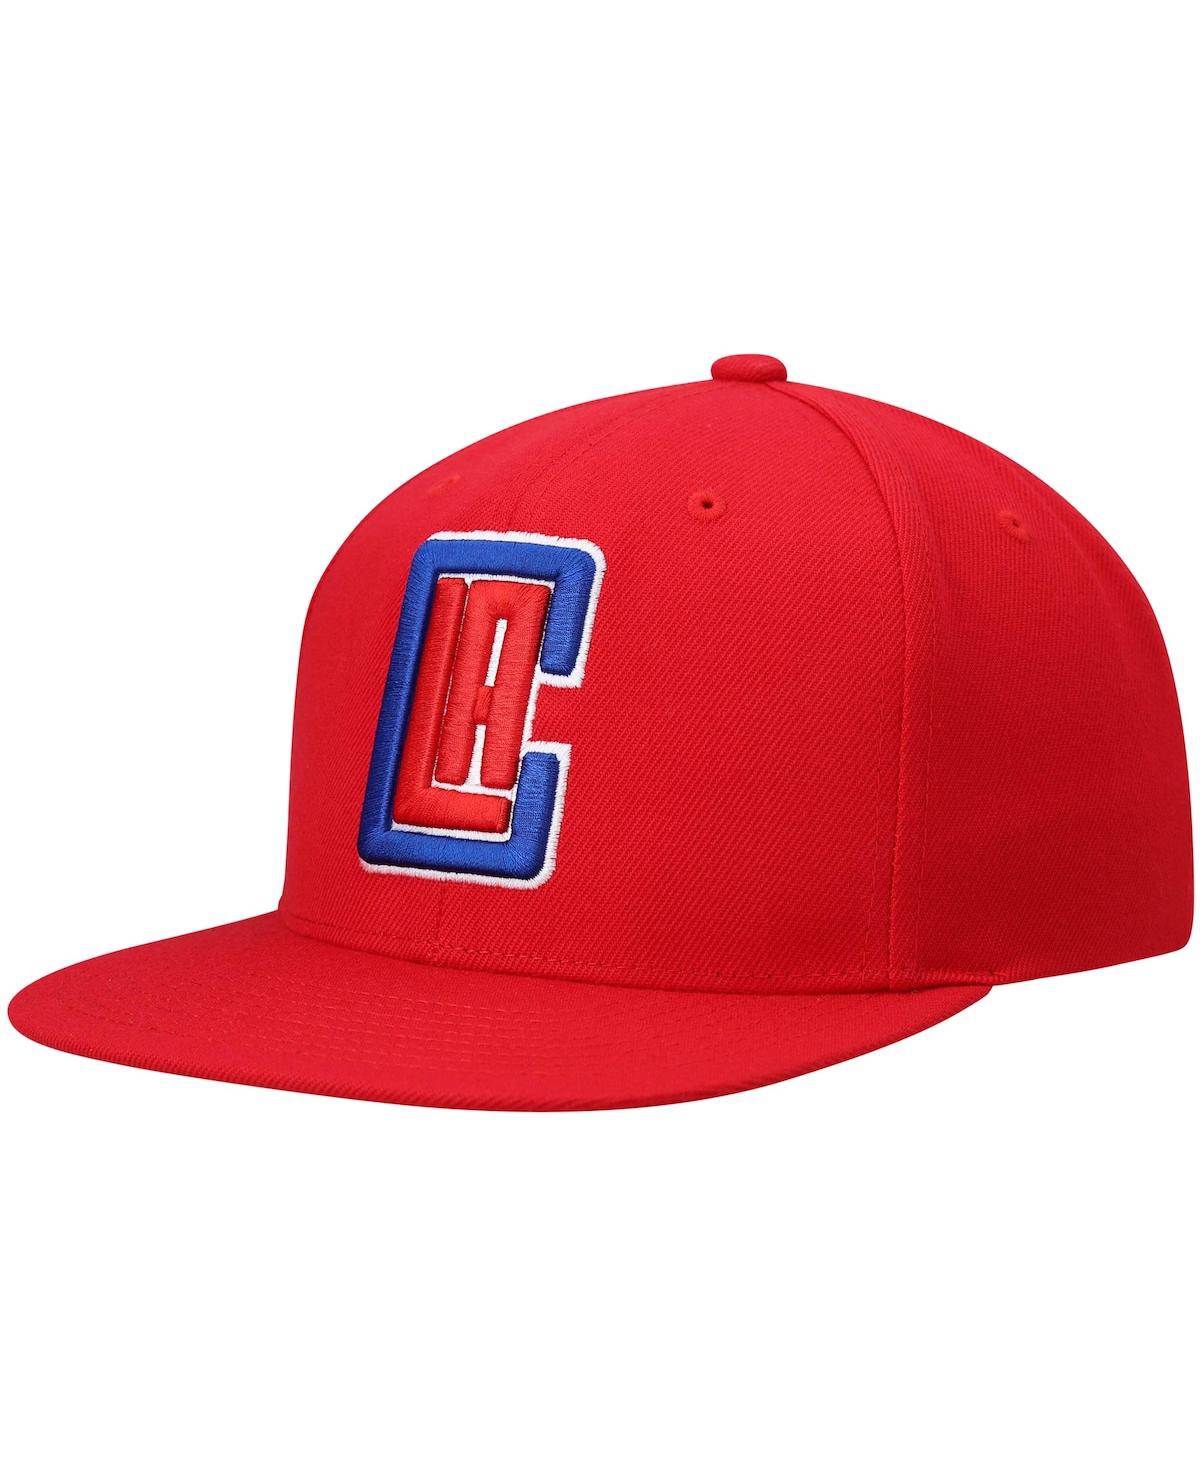 Shop Mitchell & Ness Men's  Red La Clippers Ground 2.0 Snapback Hat